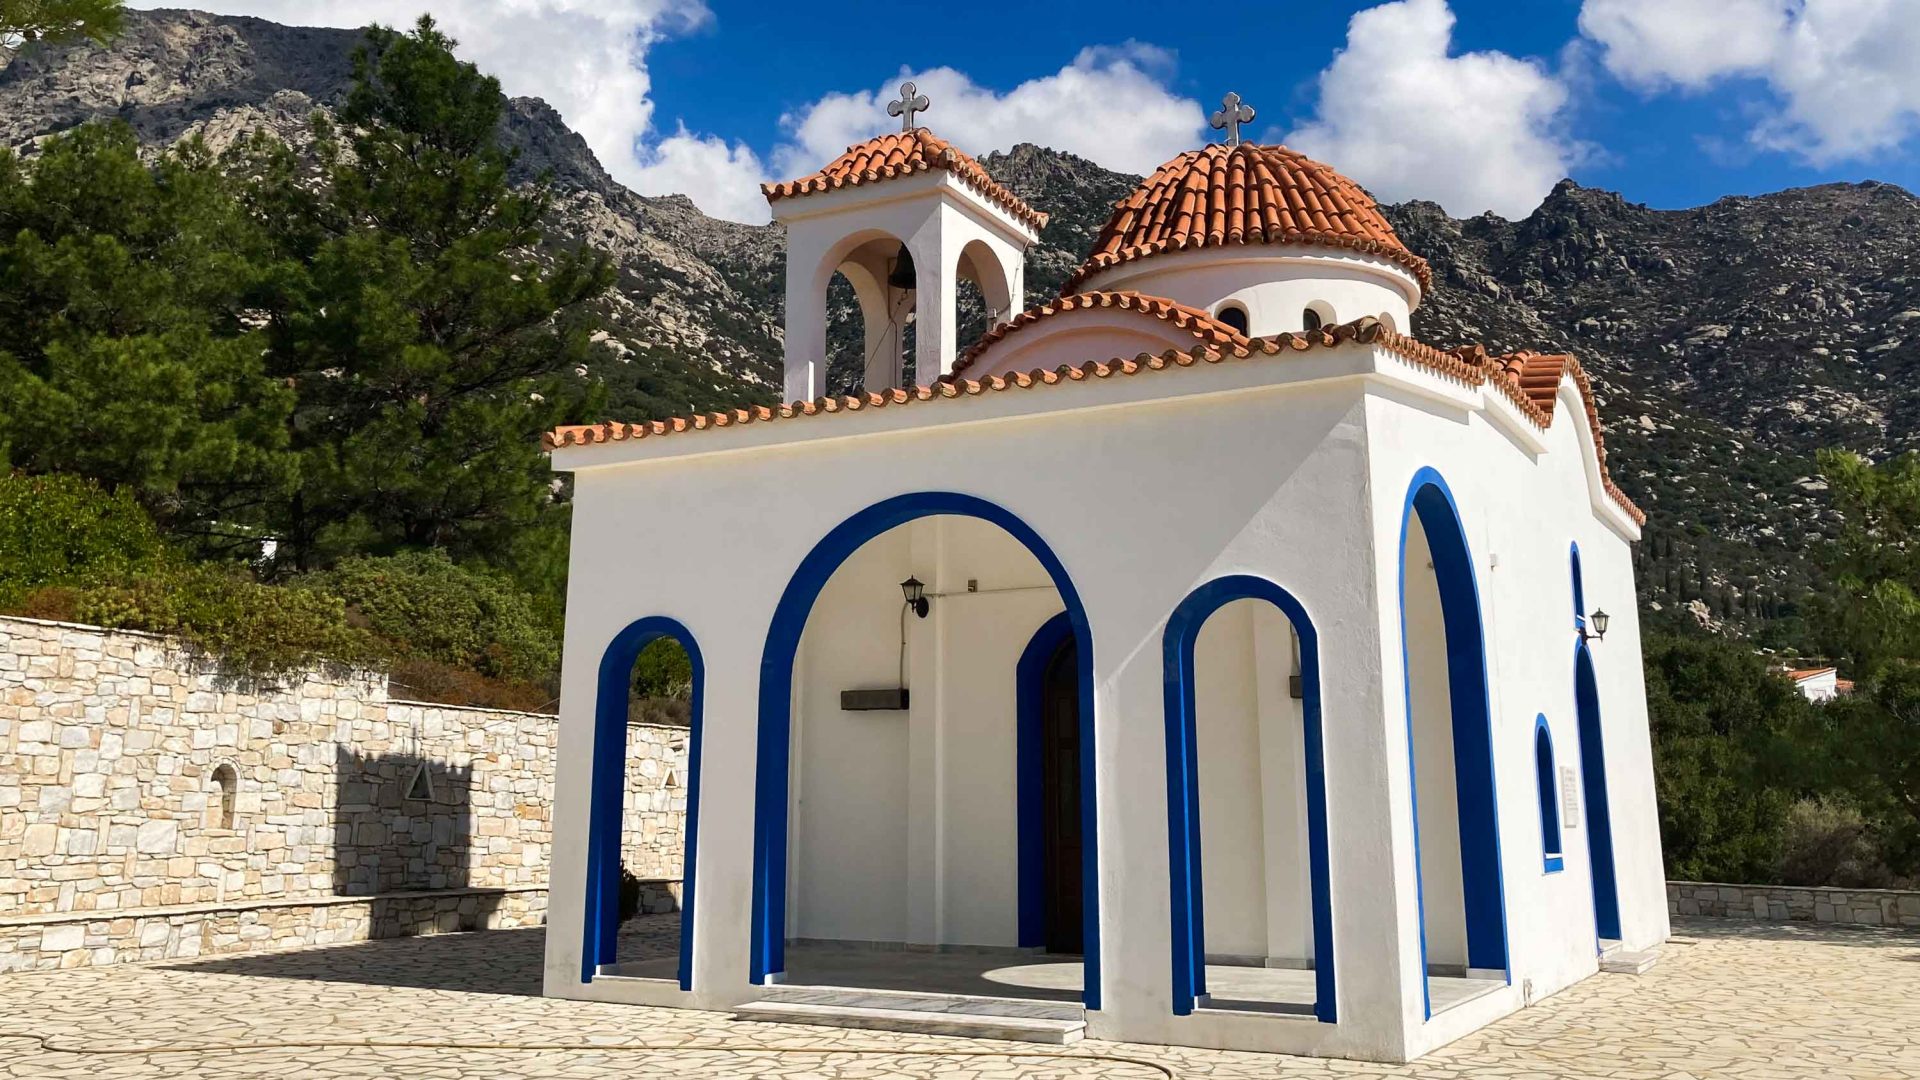 A blue and white church with a terracotta roof.